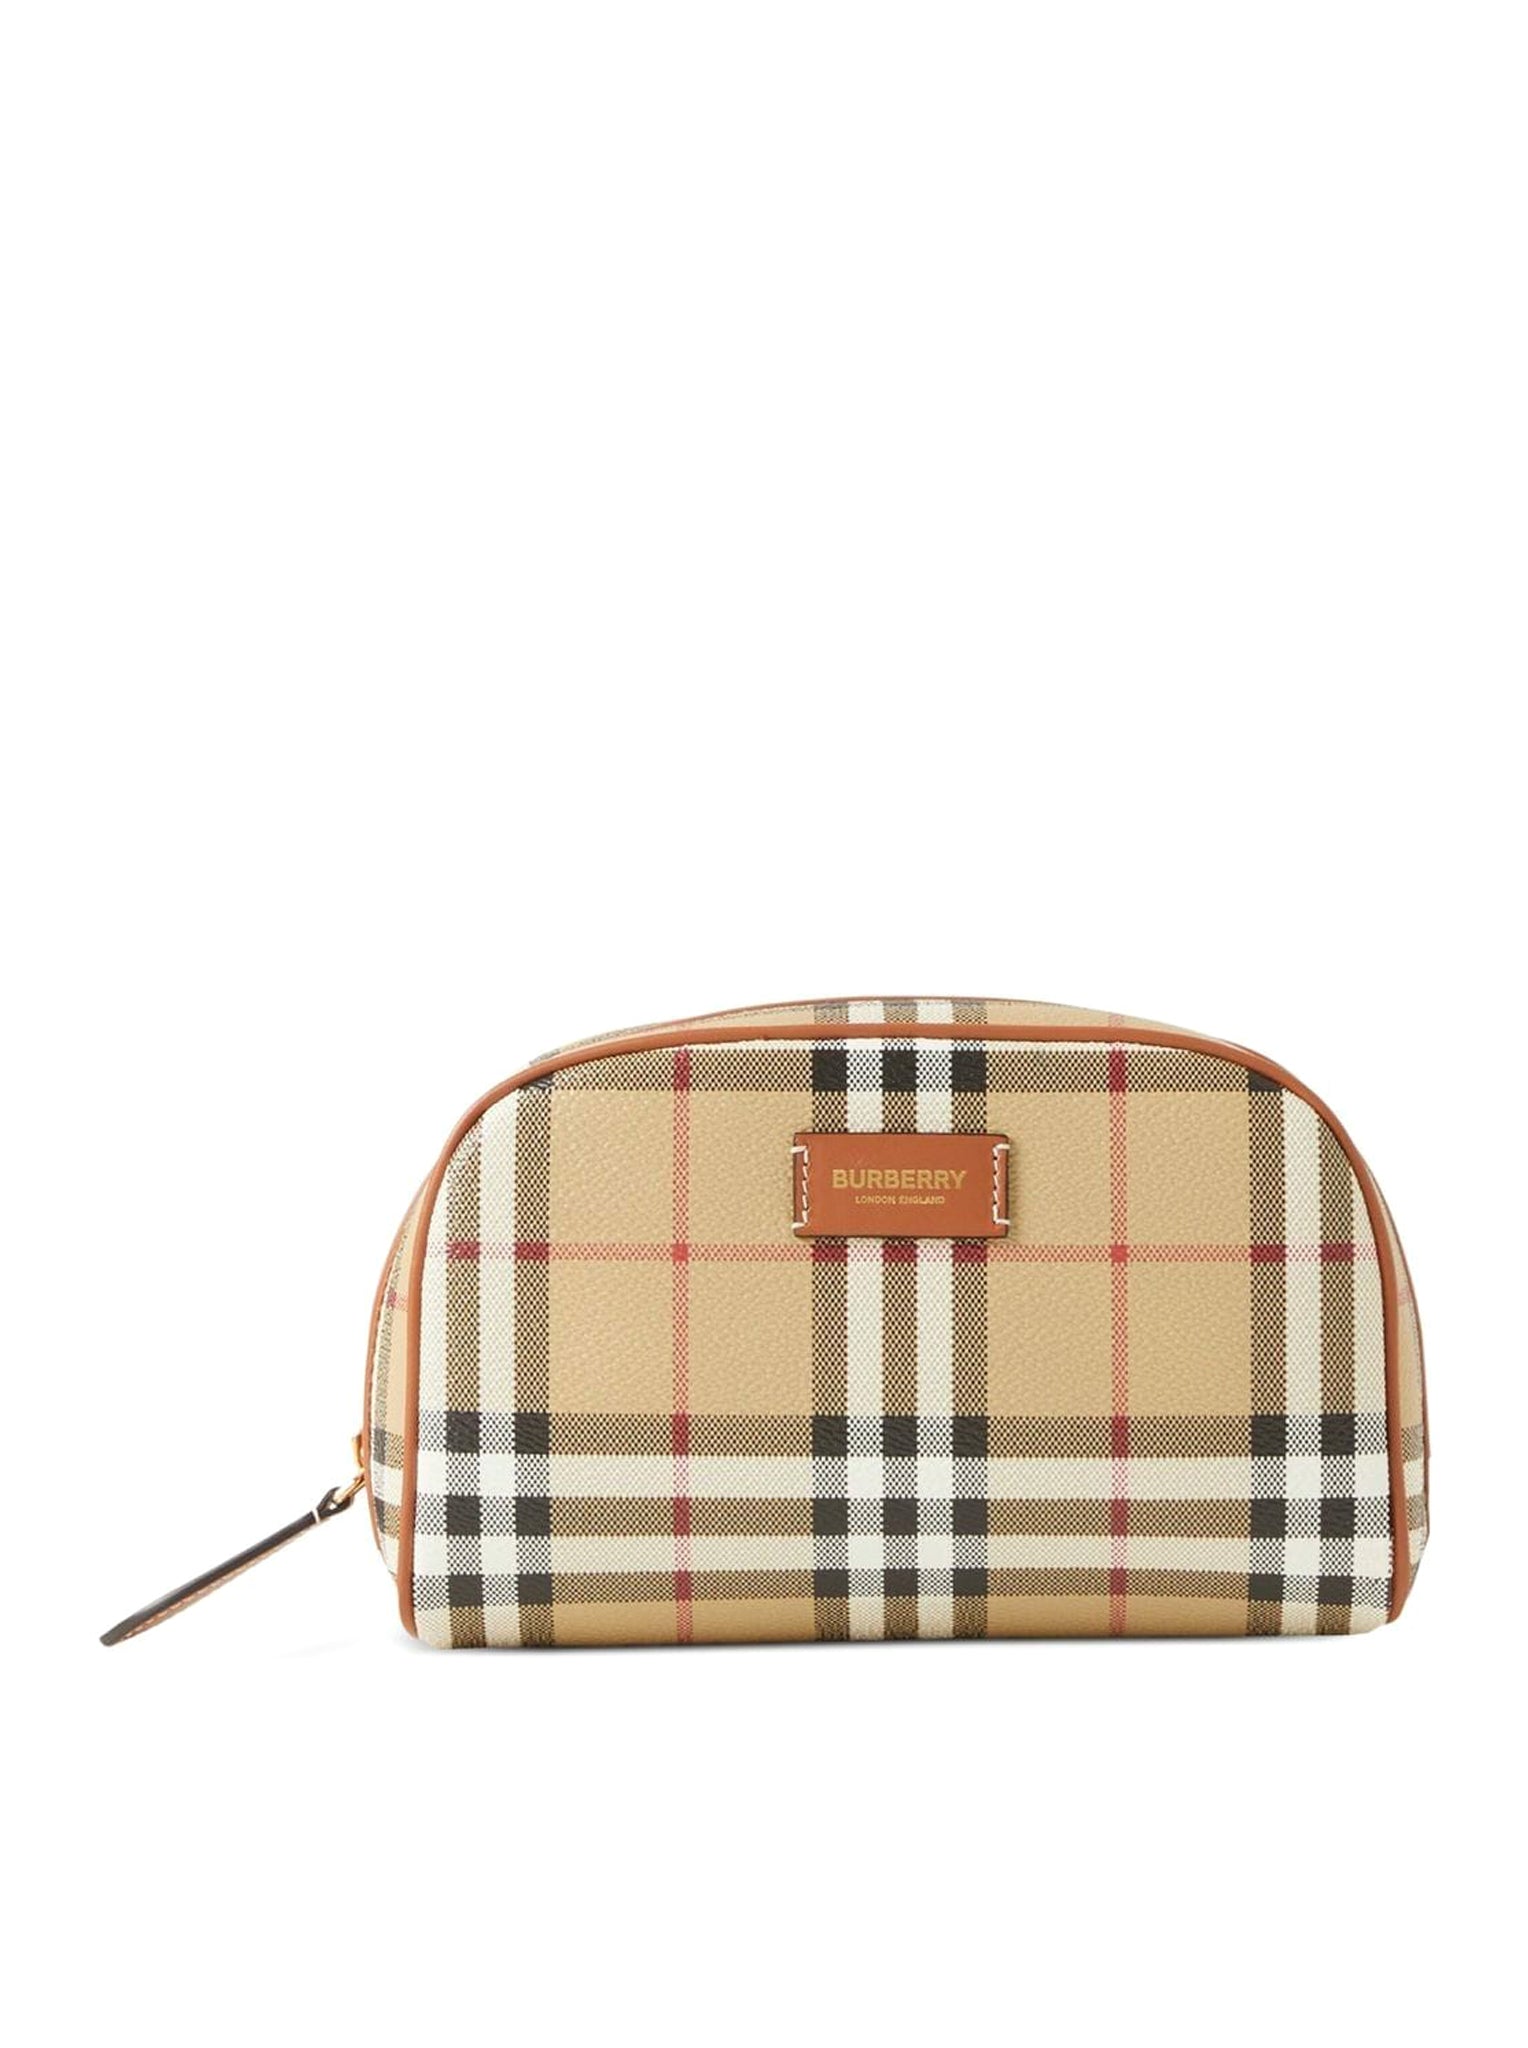 BURBERRY SMALL CHECK TRAVEL POUCH